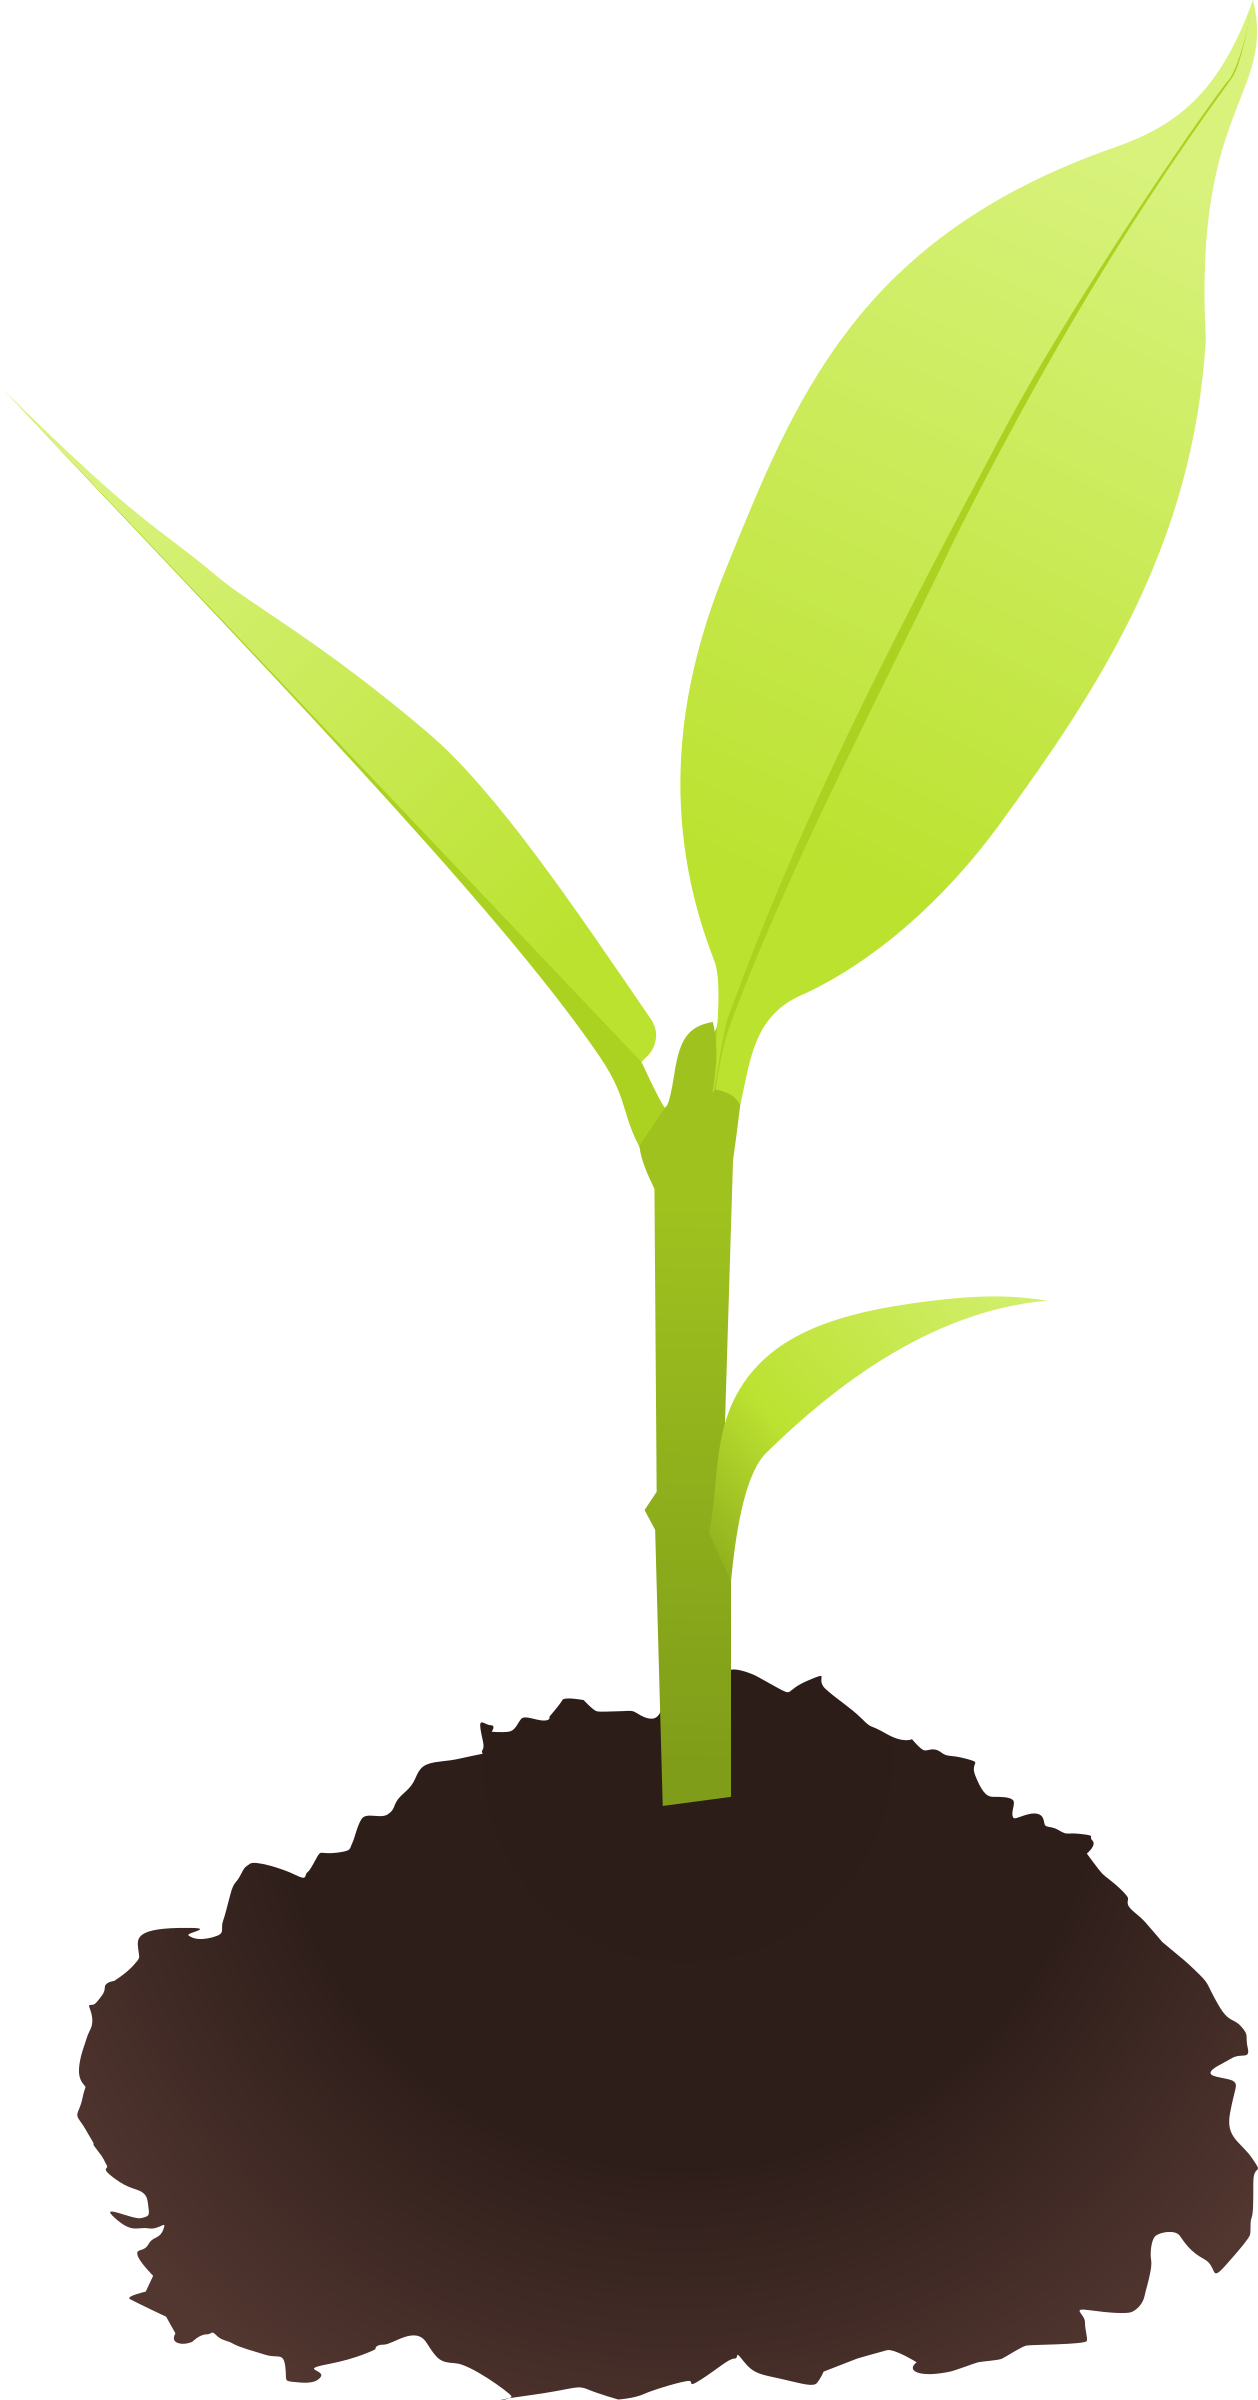 Bud plant seed small. Planting clipart short tree